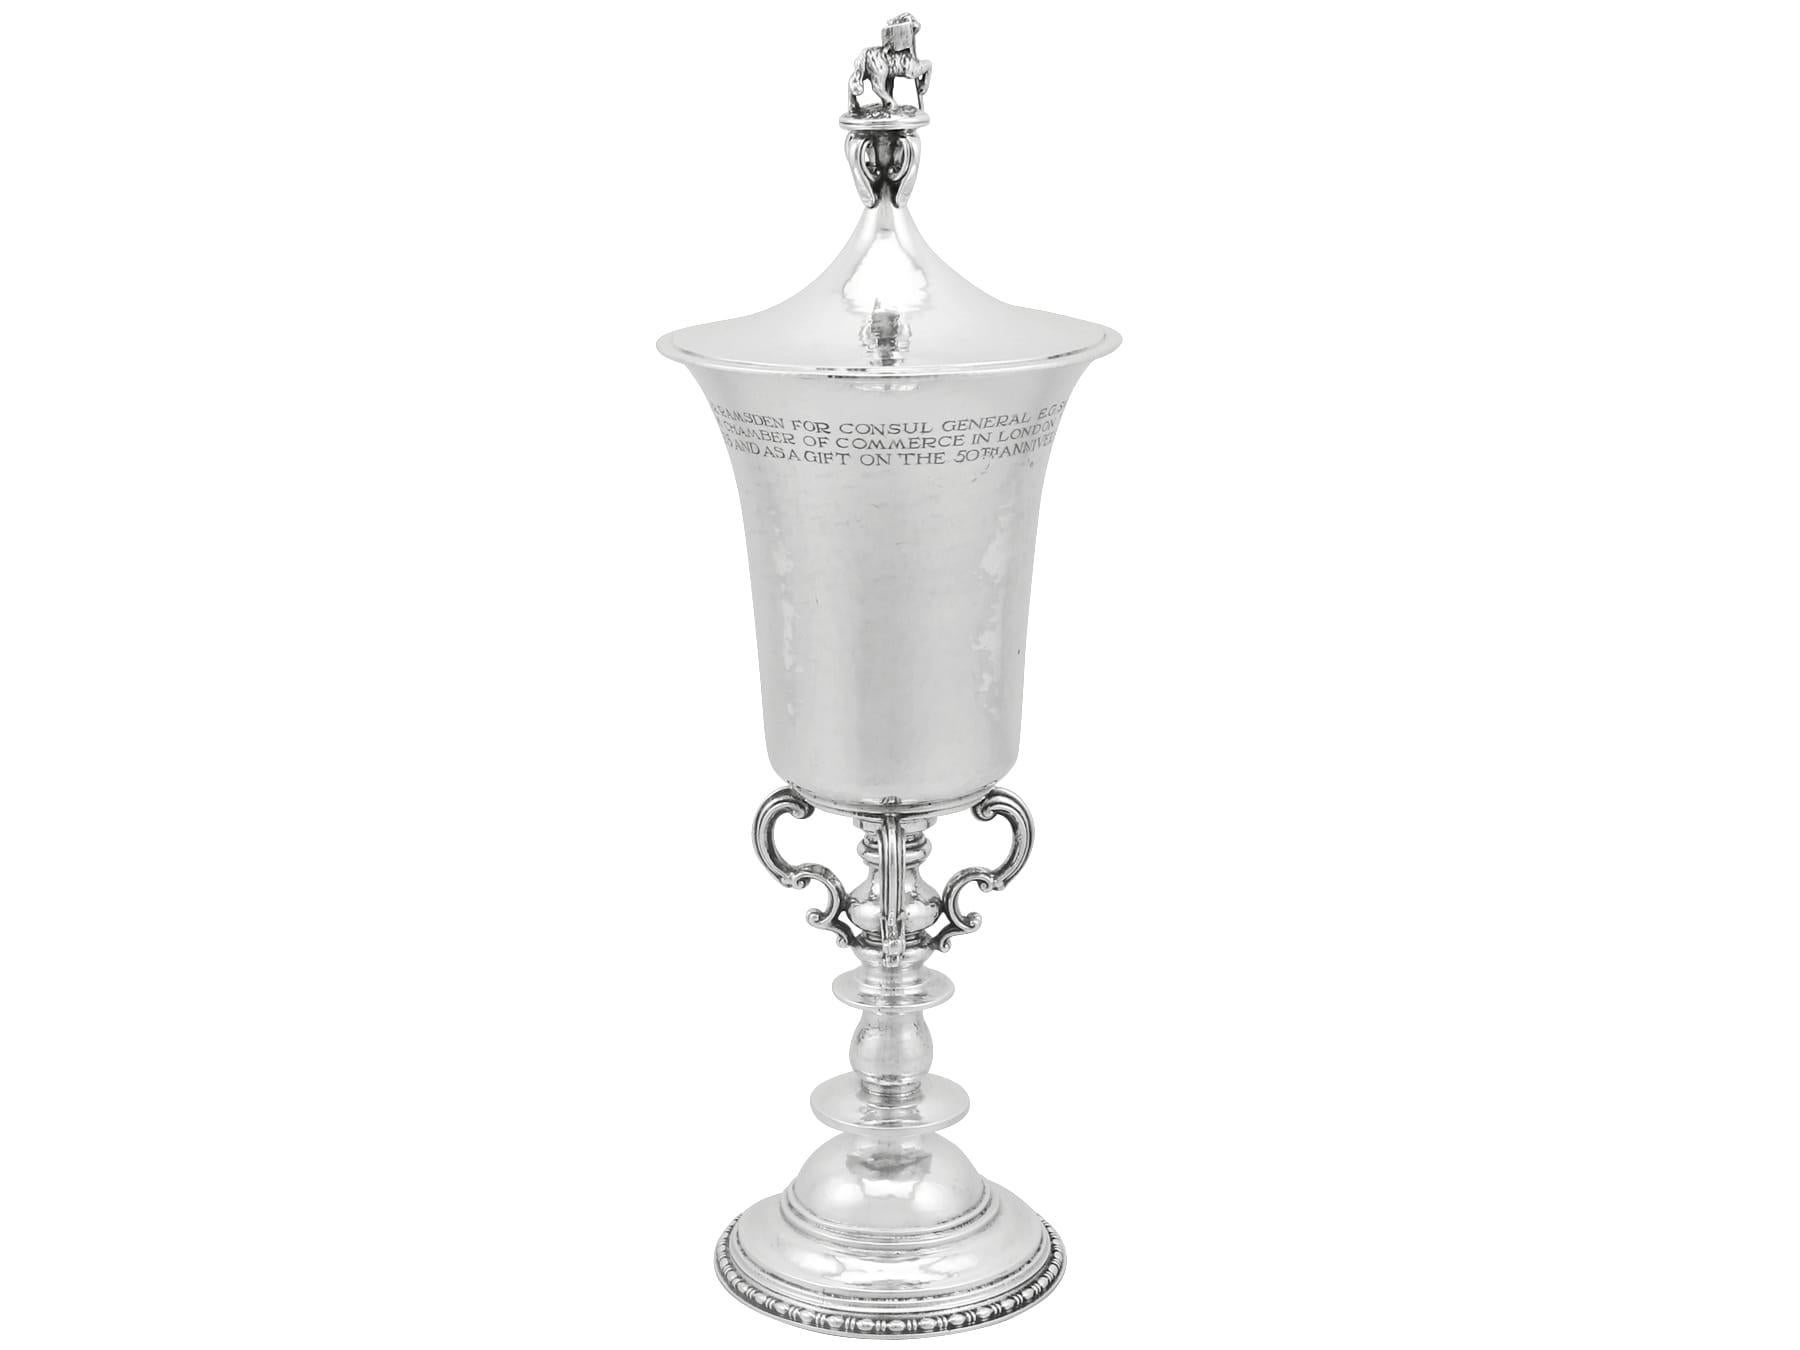 An exceptional, fine and impressive antique George V English sterling silver cup and cover made by Omar Ramsden; an addition to our diverse presentation silverware collection

This exceptional, fine and impressive antique silver cup and cover has